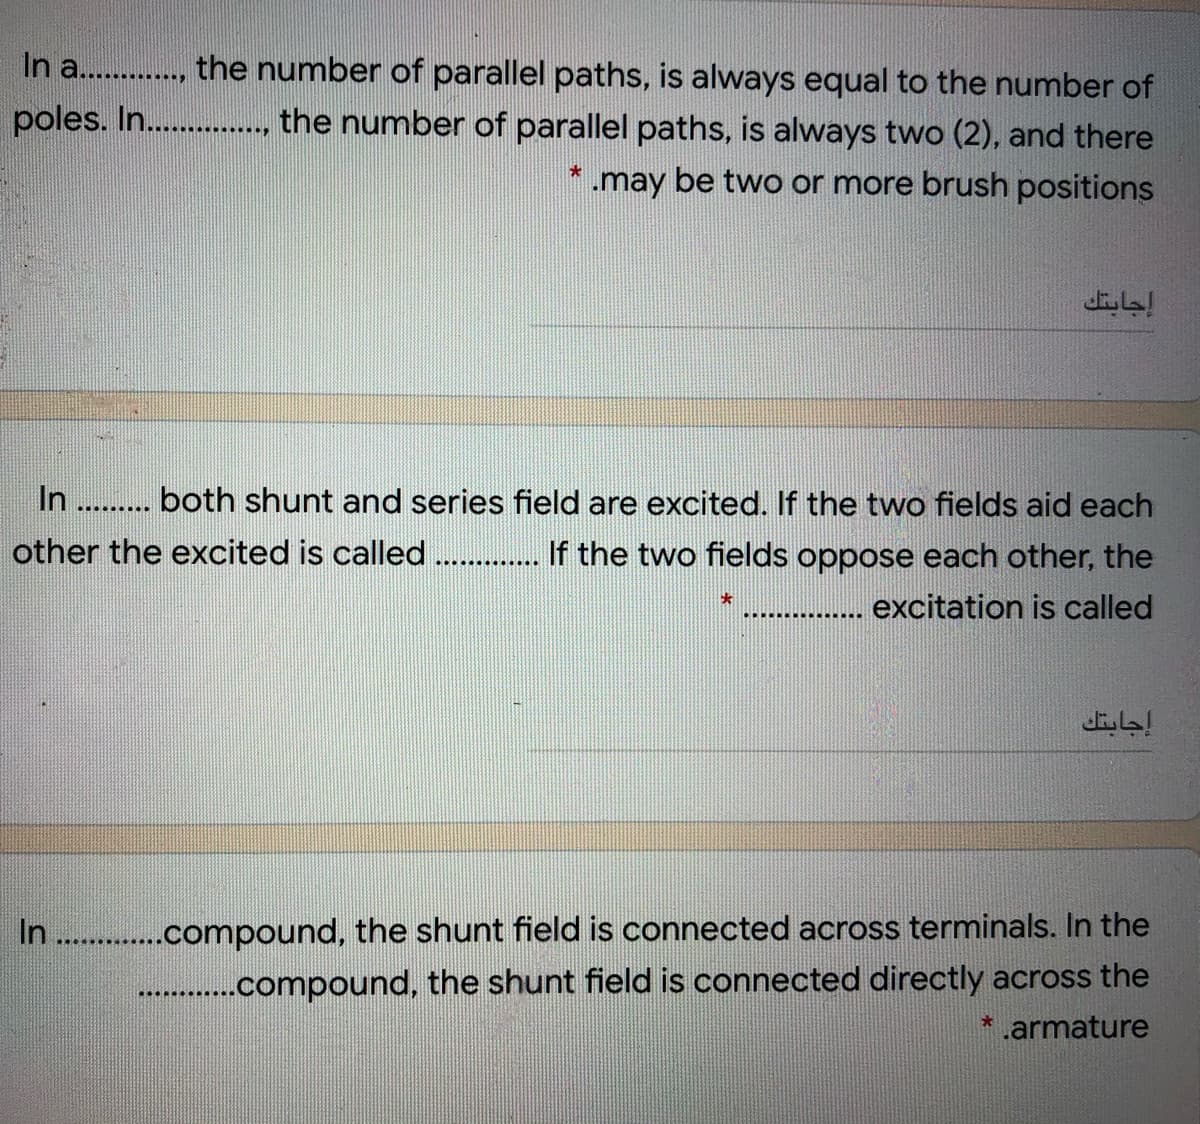 In a. ., the number of parallel paths, is always equal to the number of
poles. I ., the number of parallel paths, is always two (2), and there
........
.may be two or more brush positions
إجابتك
In . . both shunt and series field are excited. If the two fields aid each
other the excited is called . If the two fields oppose each other, the
...... ...
大
.. ........
excitation is called
إجابتك
In . .compound, the shunt field is connected across terminals. In the
......compound, the shunt field is connected directly across the
* .armature
.....
